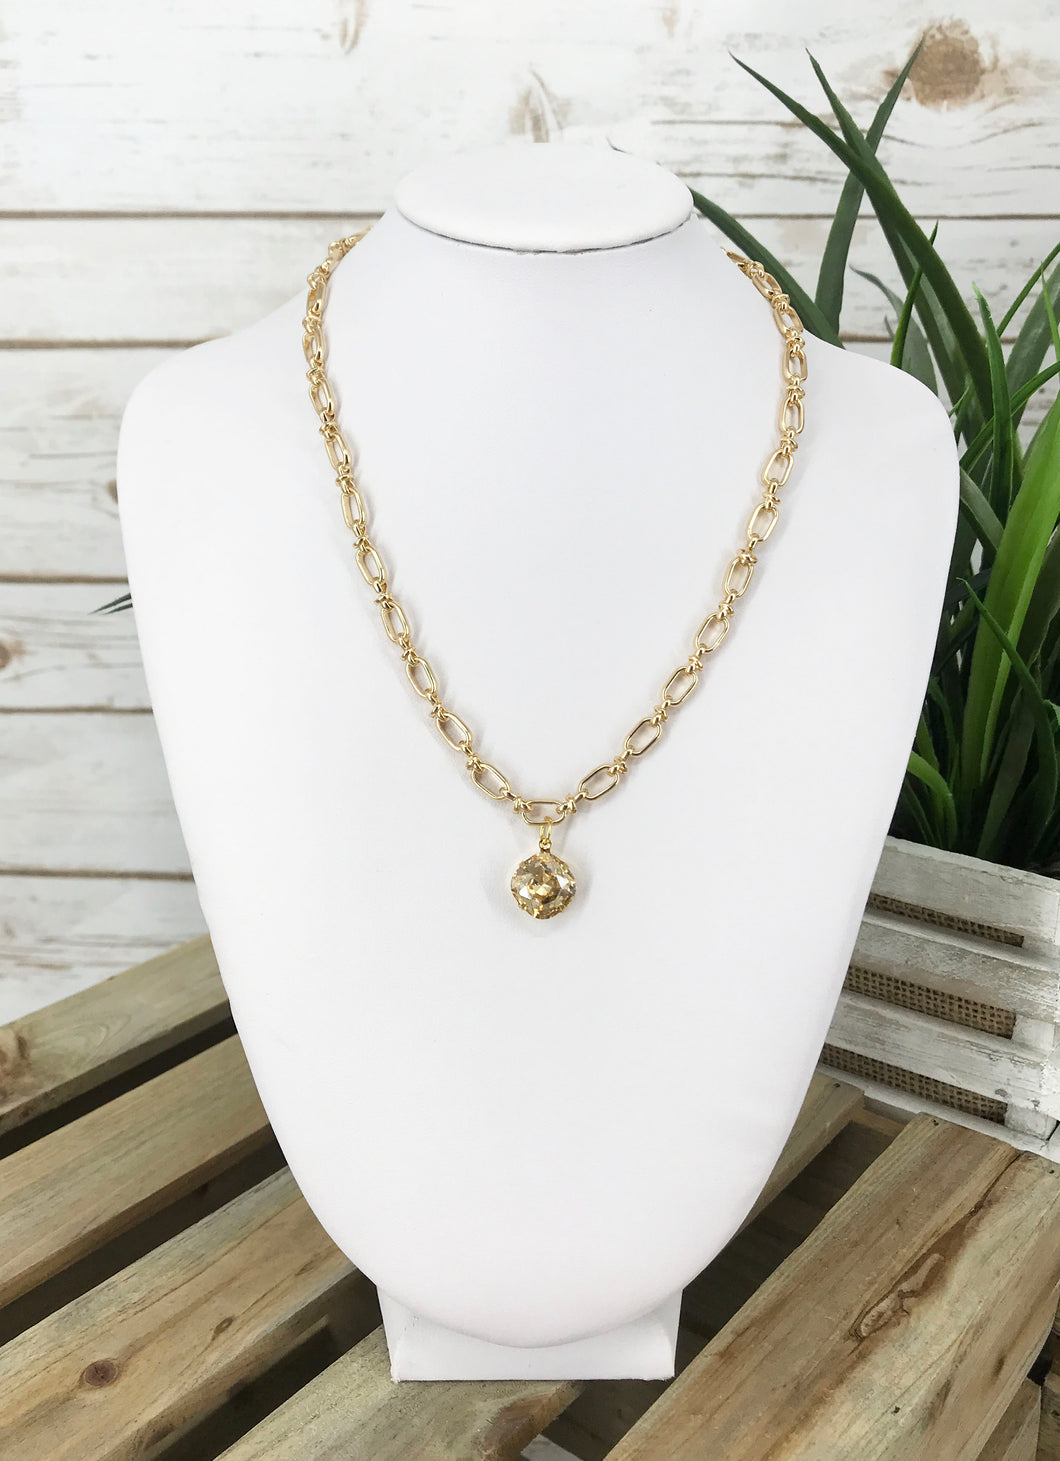 Anchor Chain & Crystal Pendant Necklace - N584